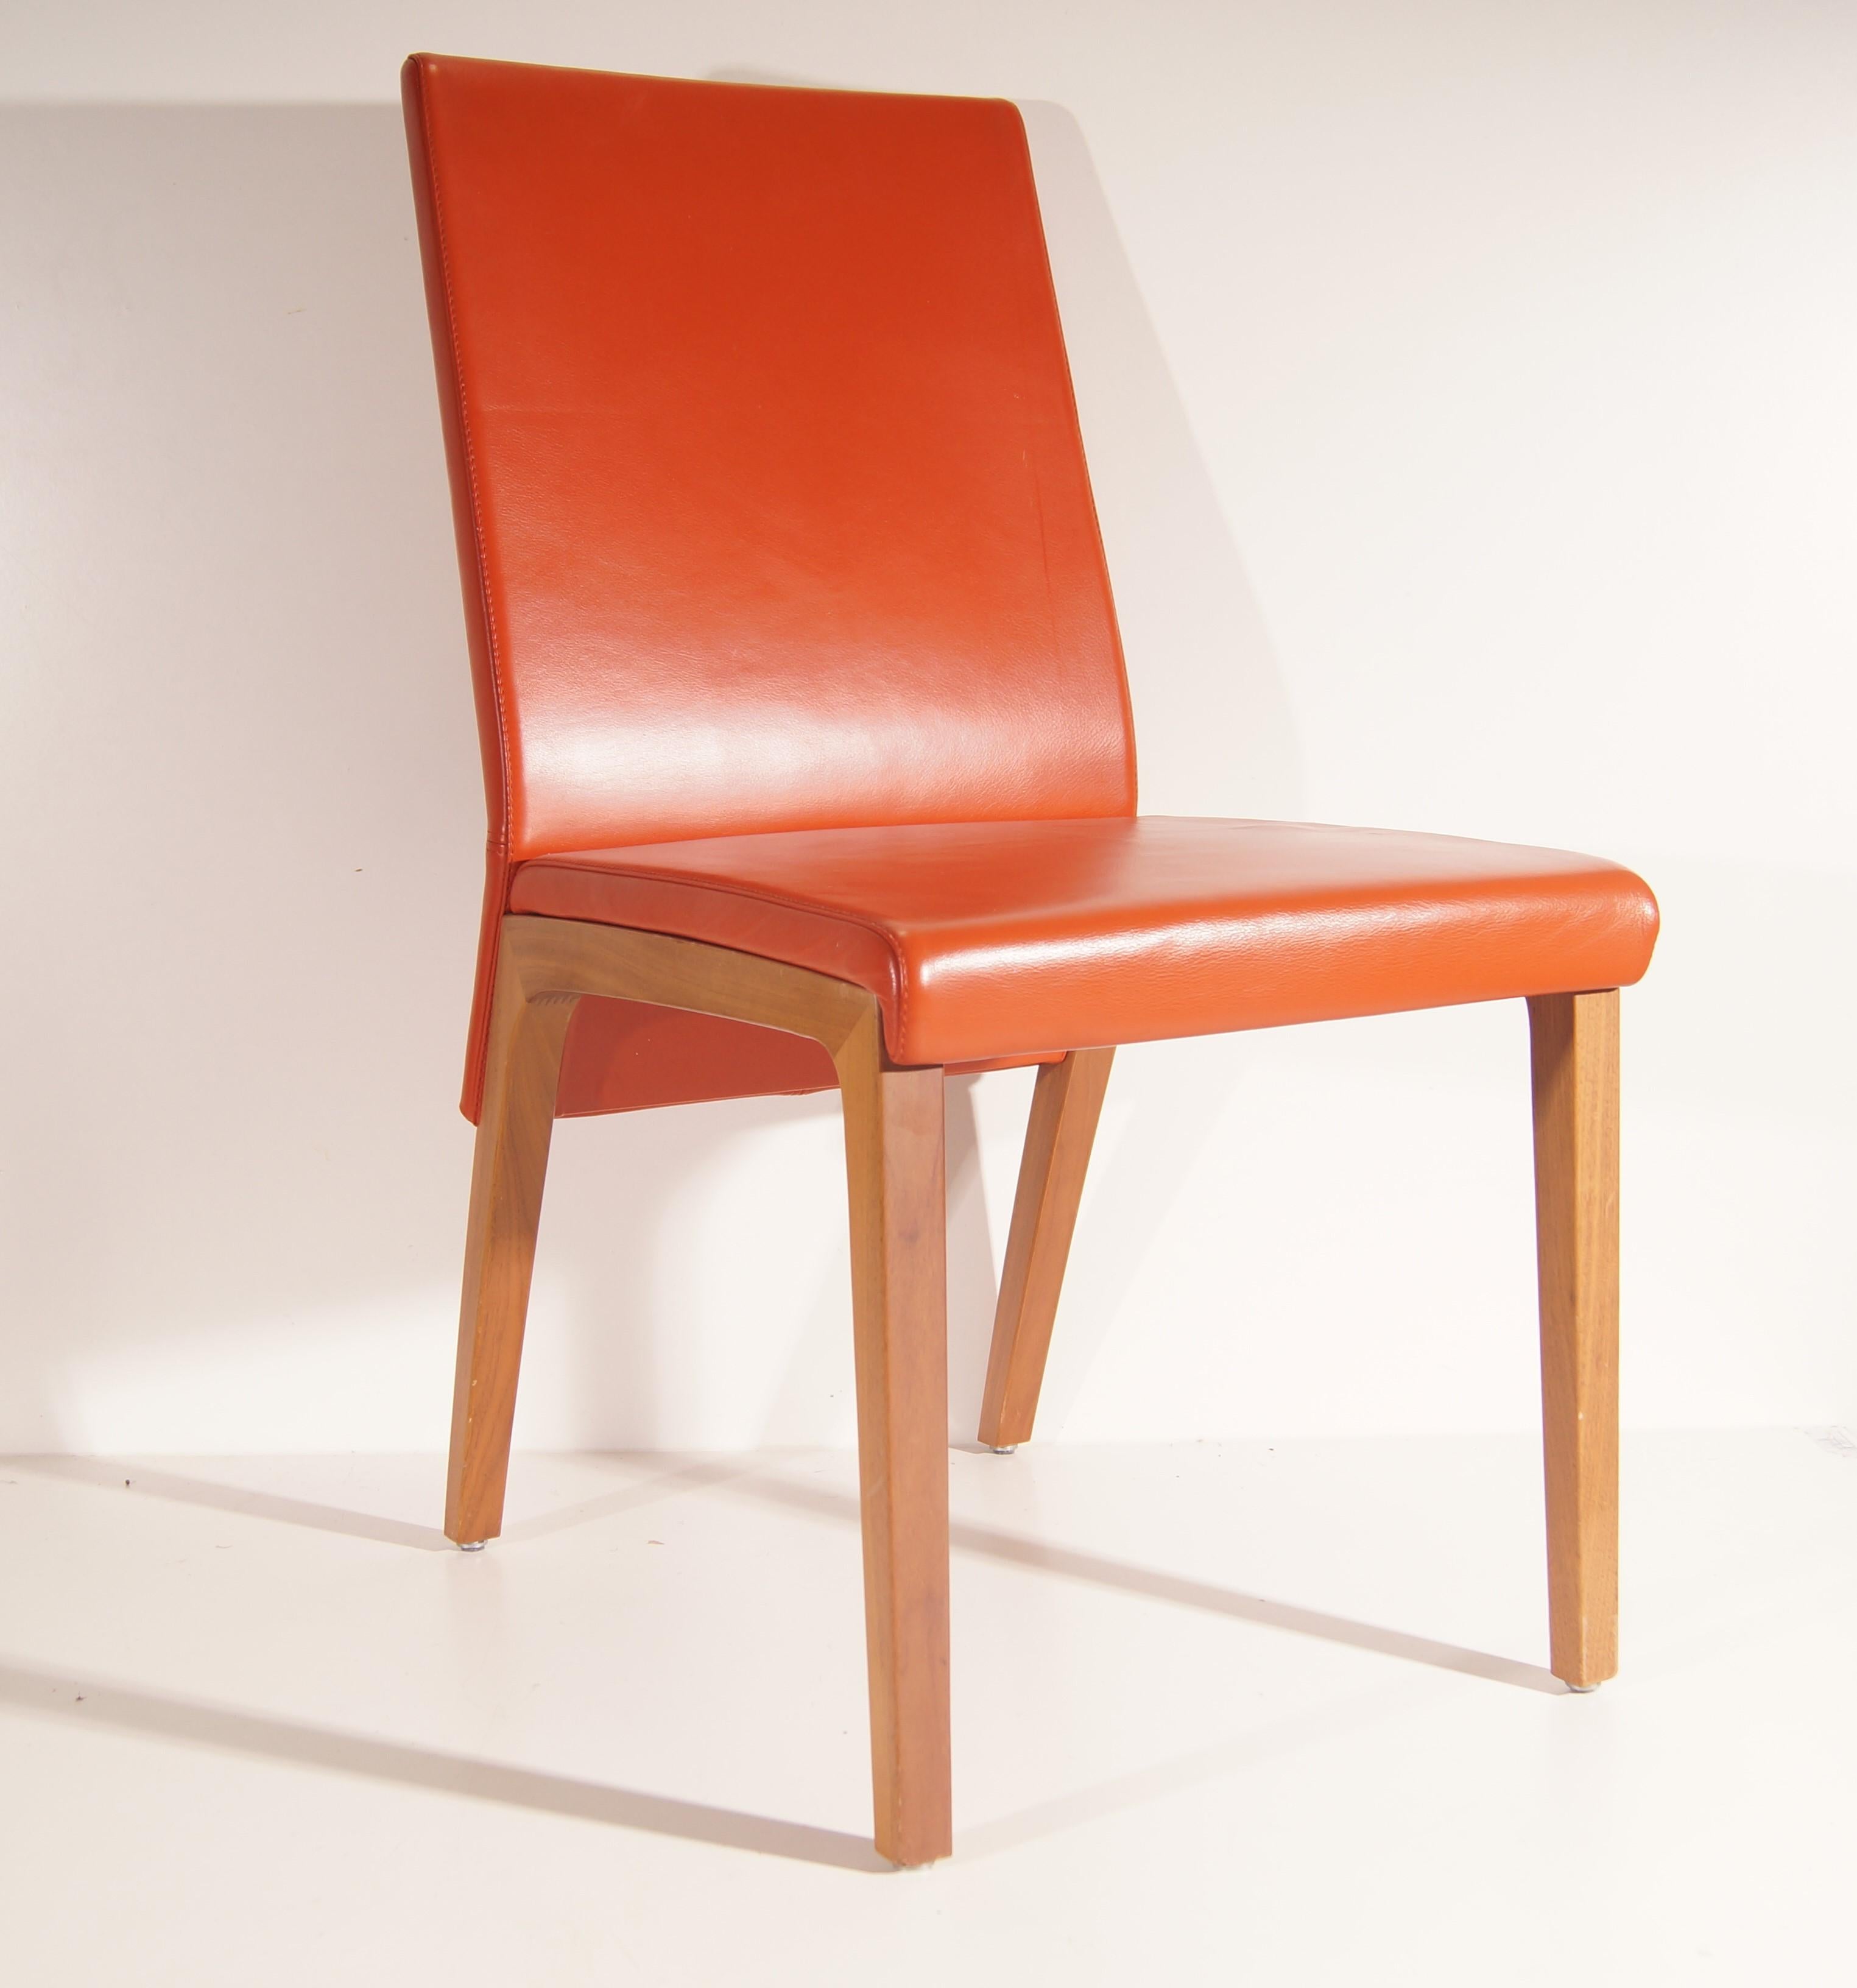 Rolf Benz - Dining room chair in orange leather

3 copies available.

The thick leather is in very good condition. Minimal deformations on the seat, see photos. 1 chair has some multiple signs of wear on the wood.

The flexible backrests provide